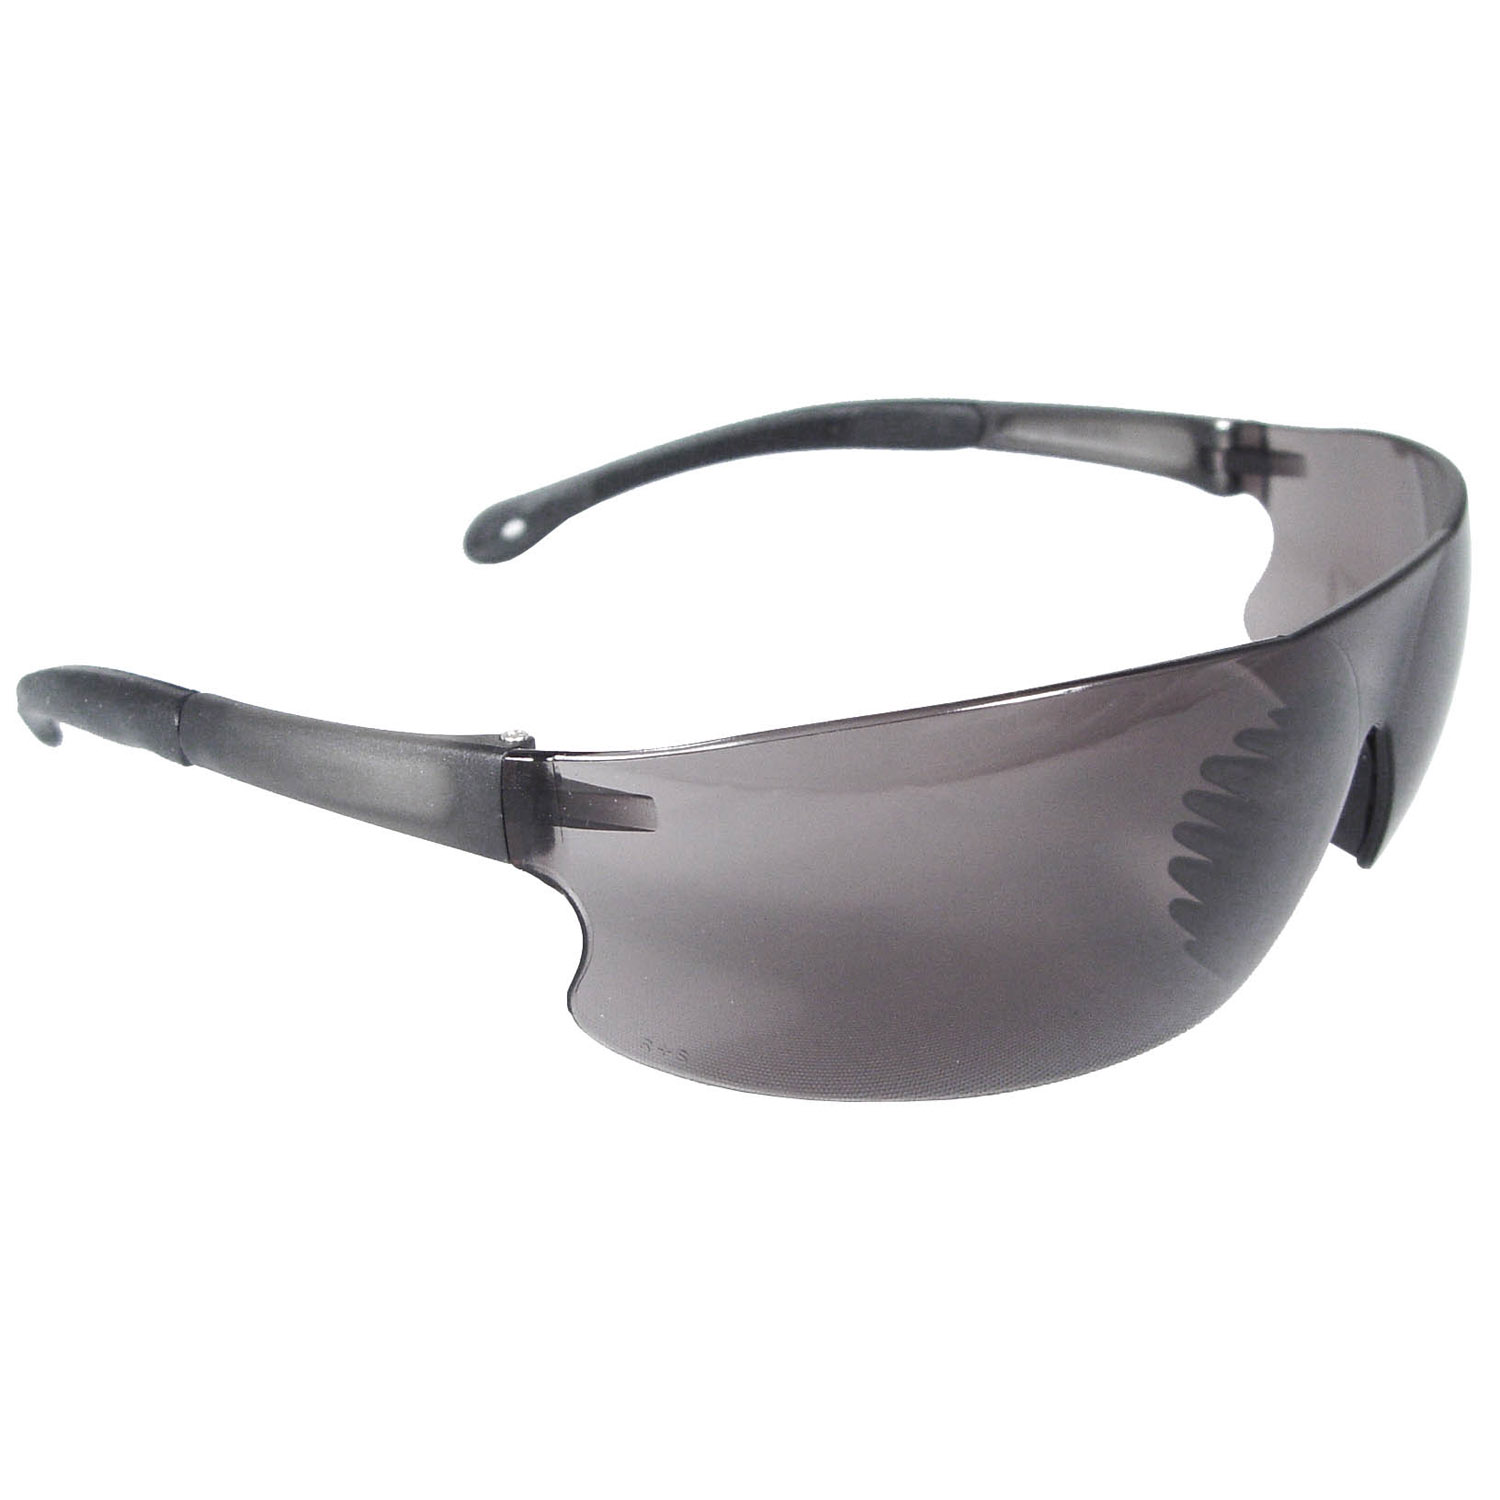 Free Shipping RS1-20 Radians Rad-Sequel RS1 Safety Glasses 3 Pair Smoke Lens 